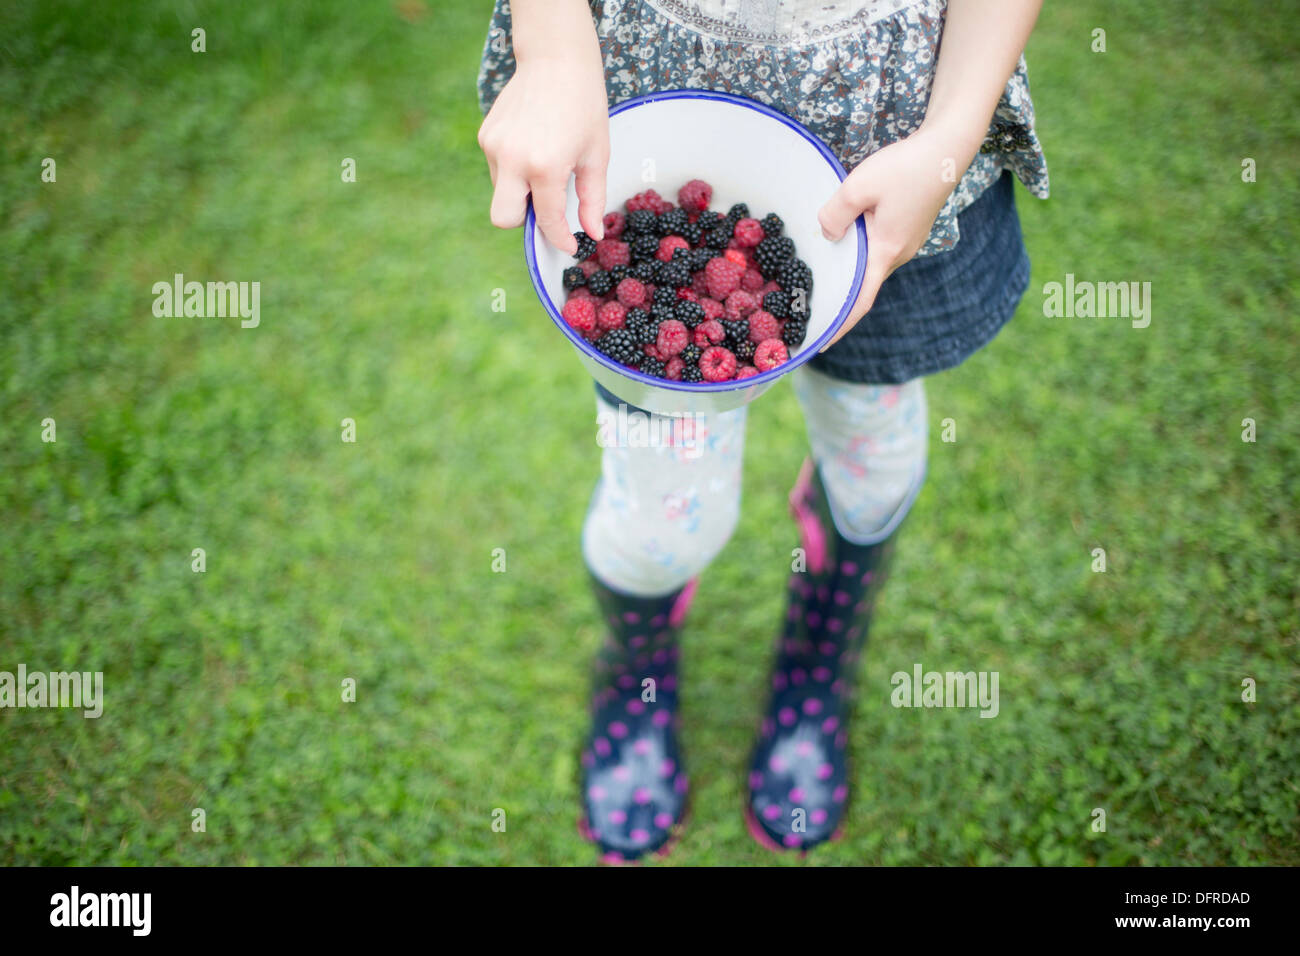 Girl Holding Bowl Filled With Raspberries And Blackberries Stock Photo